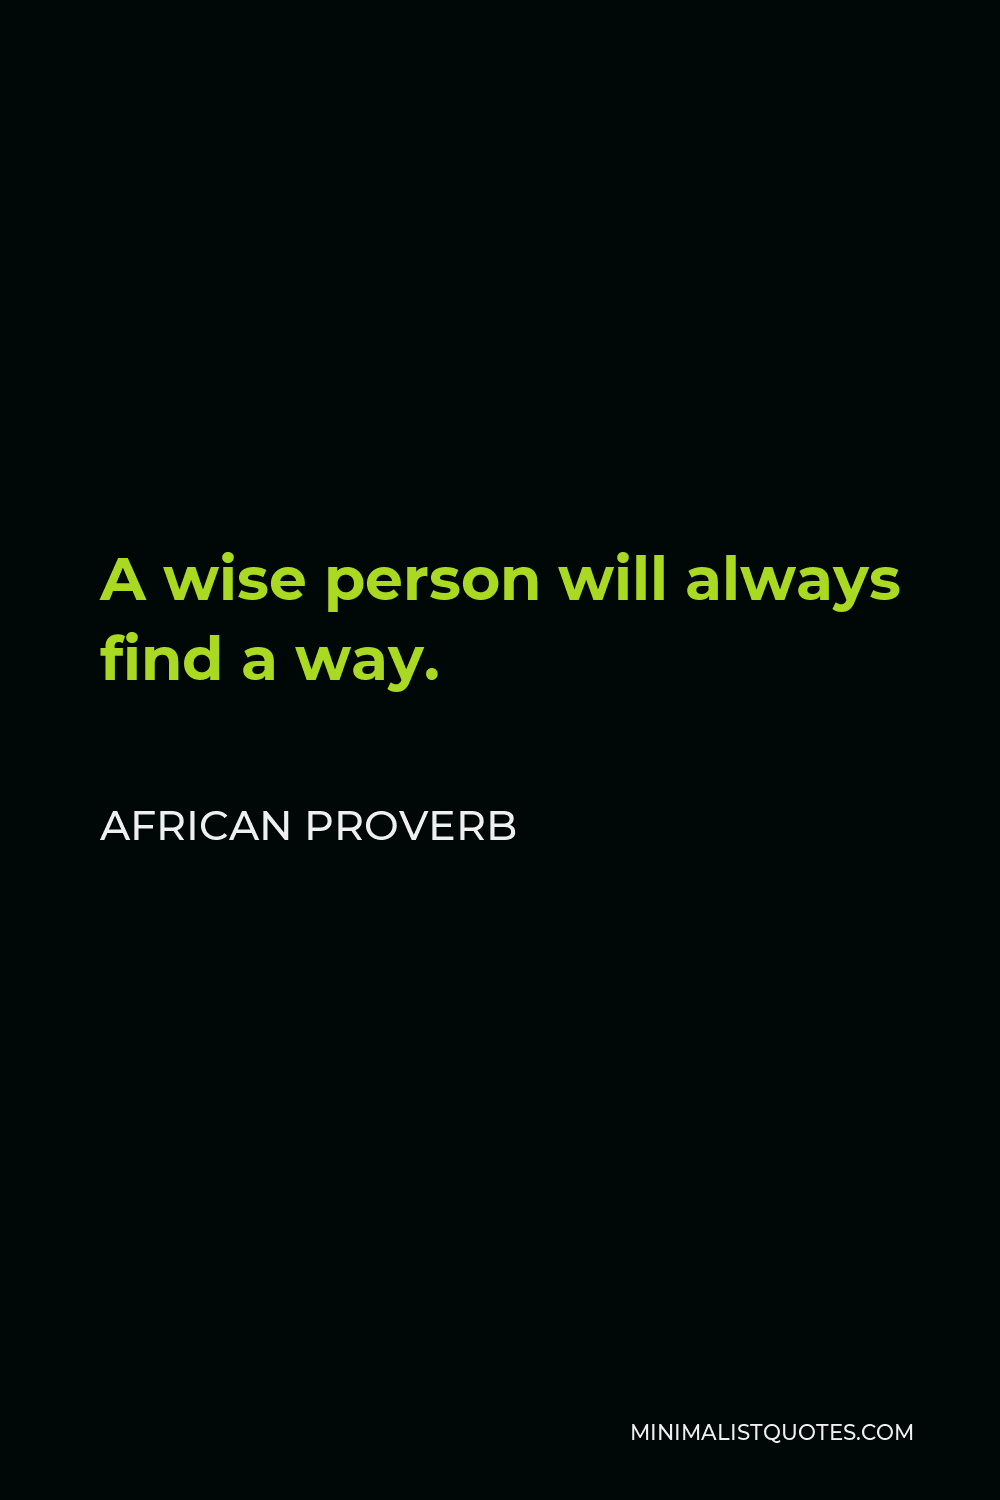 African Proverb Quote - A wise person will always find a way.